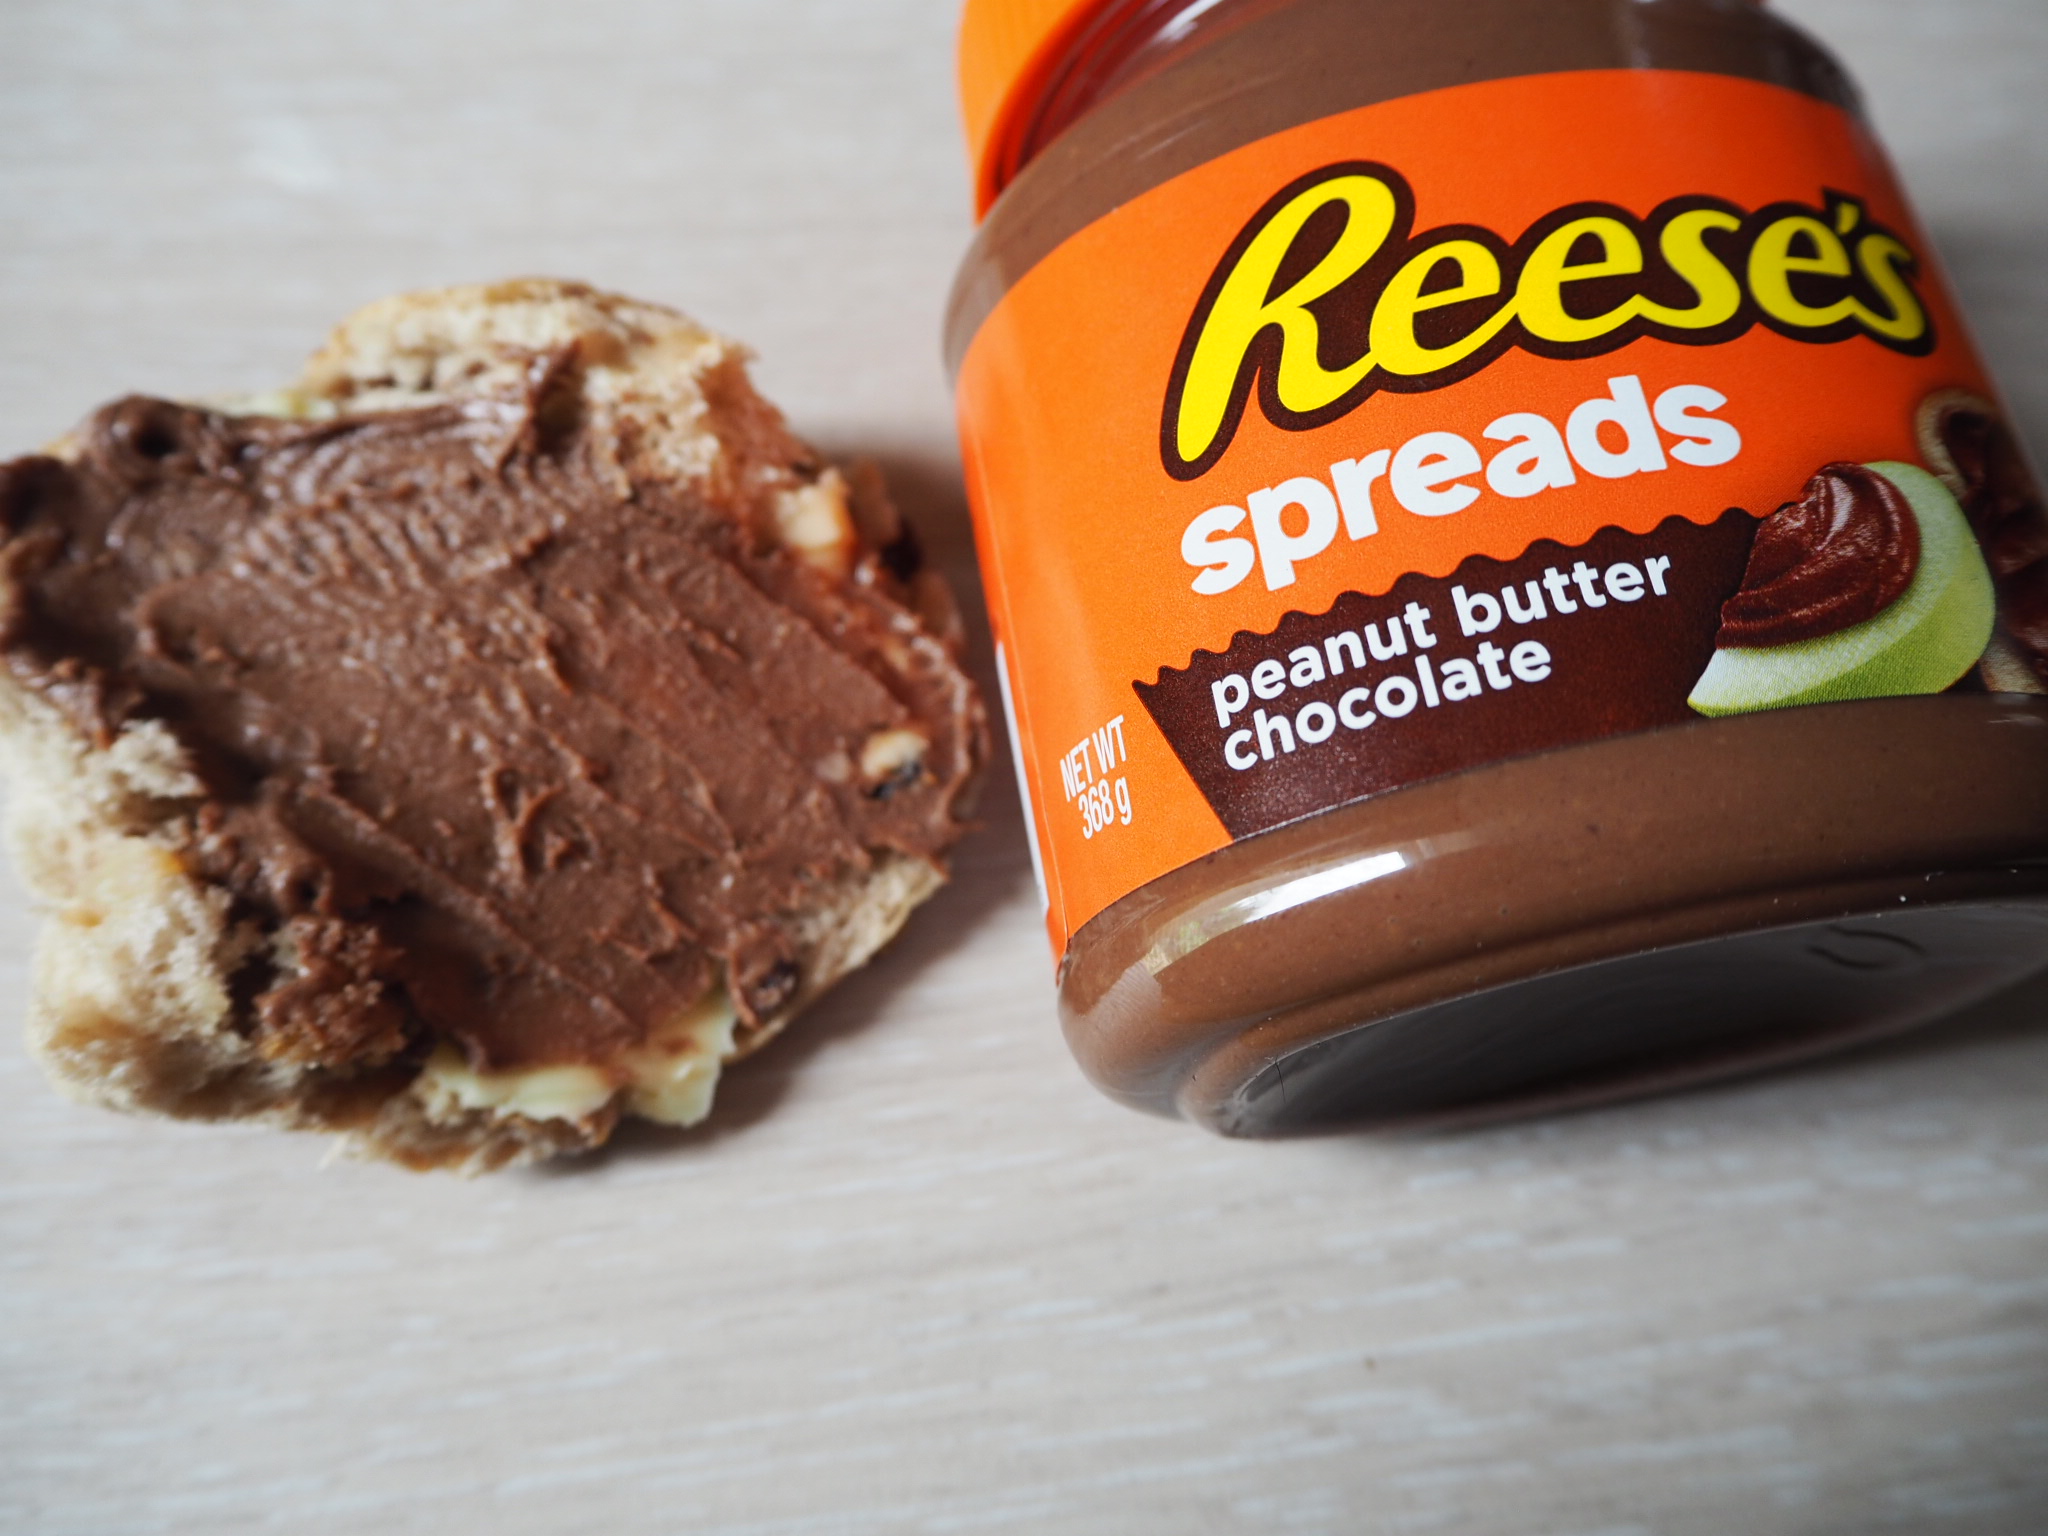 Reese's Peanut Butter Chocolate Spread. 